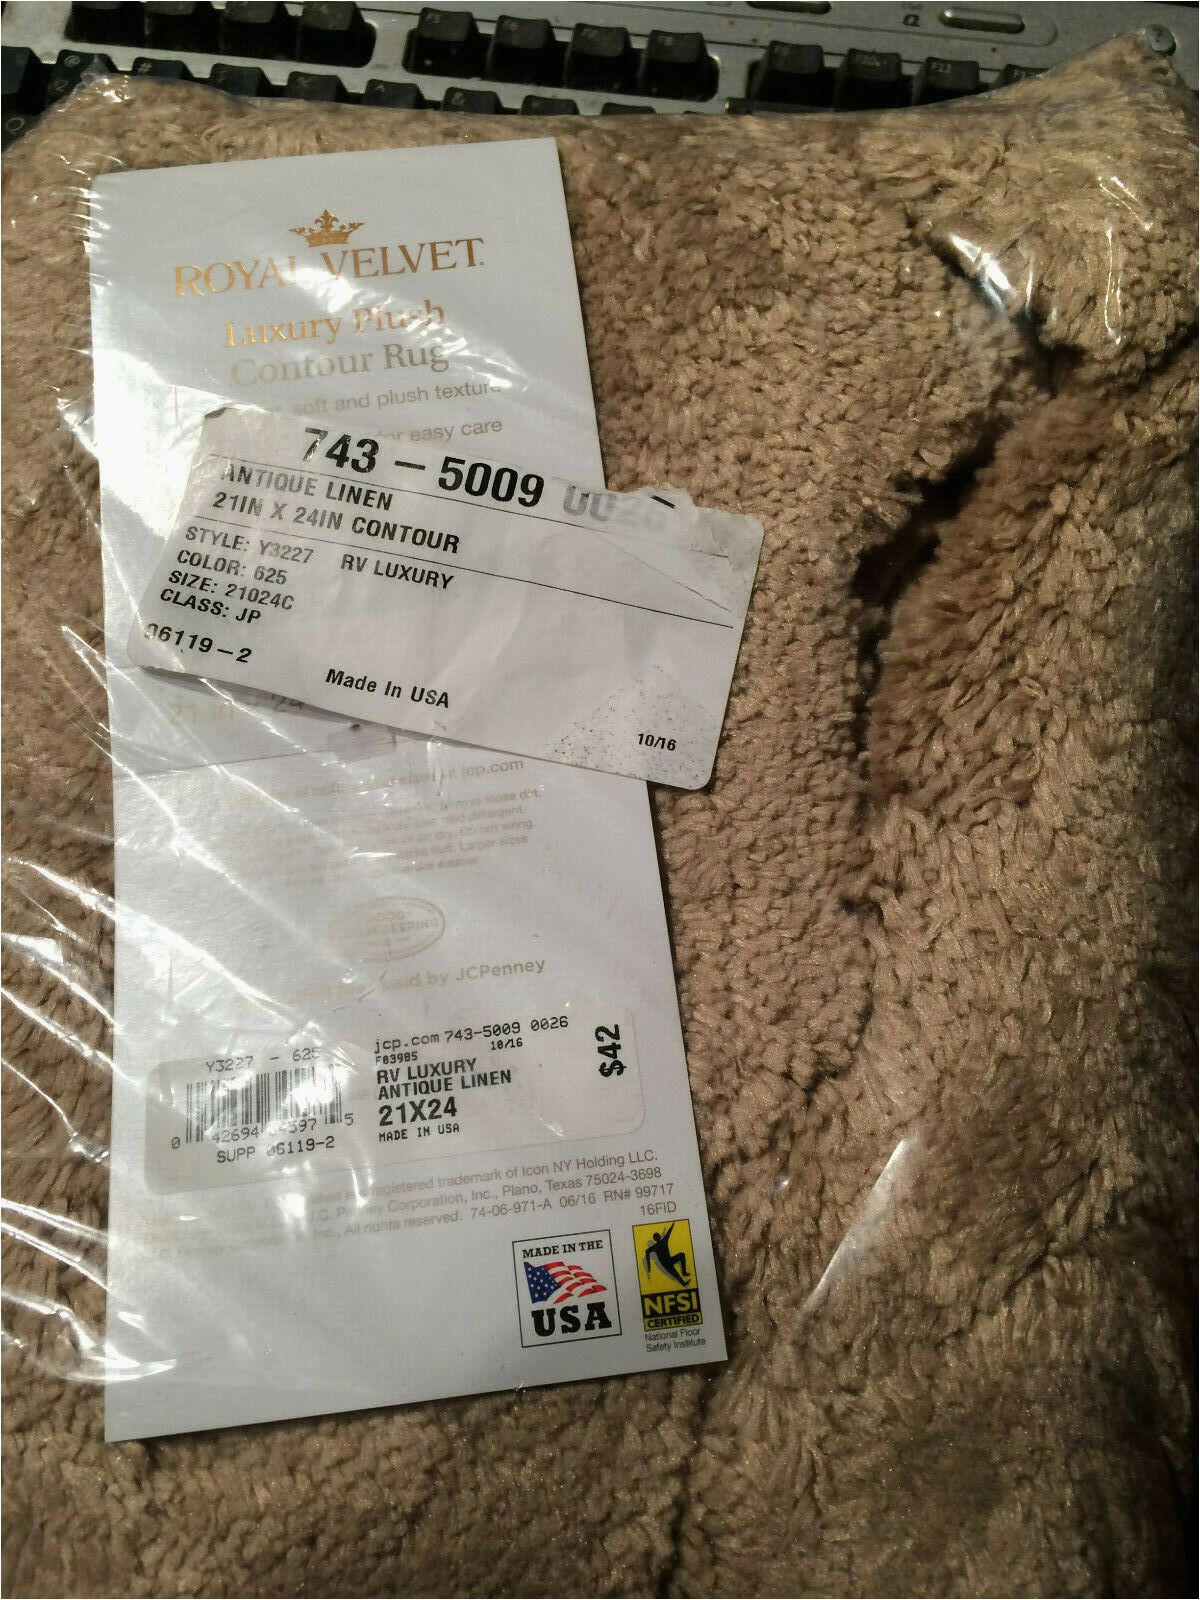 Bath Rug Cut to Fit Royal Velvet Luxury Plush Contour Rug "antique Lineen" 21" X 24" New with Tags